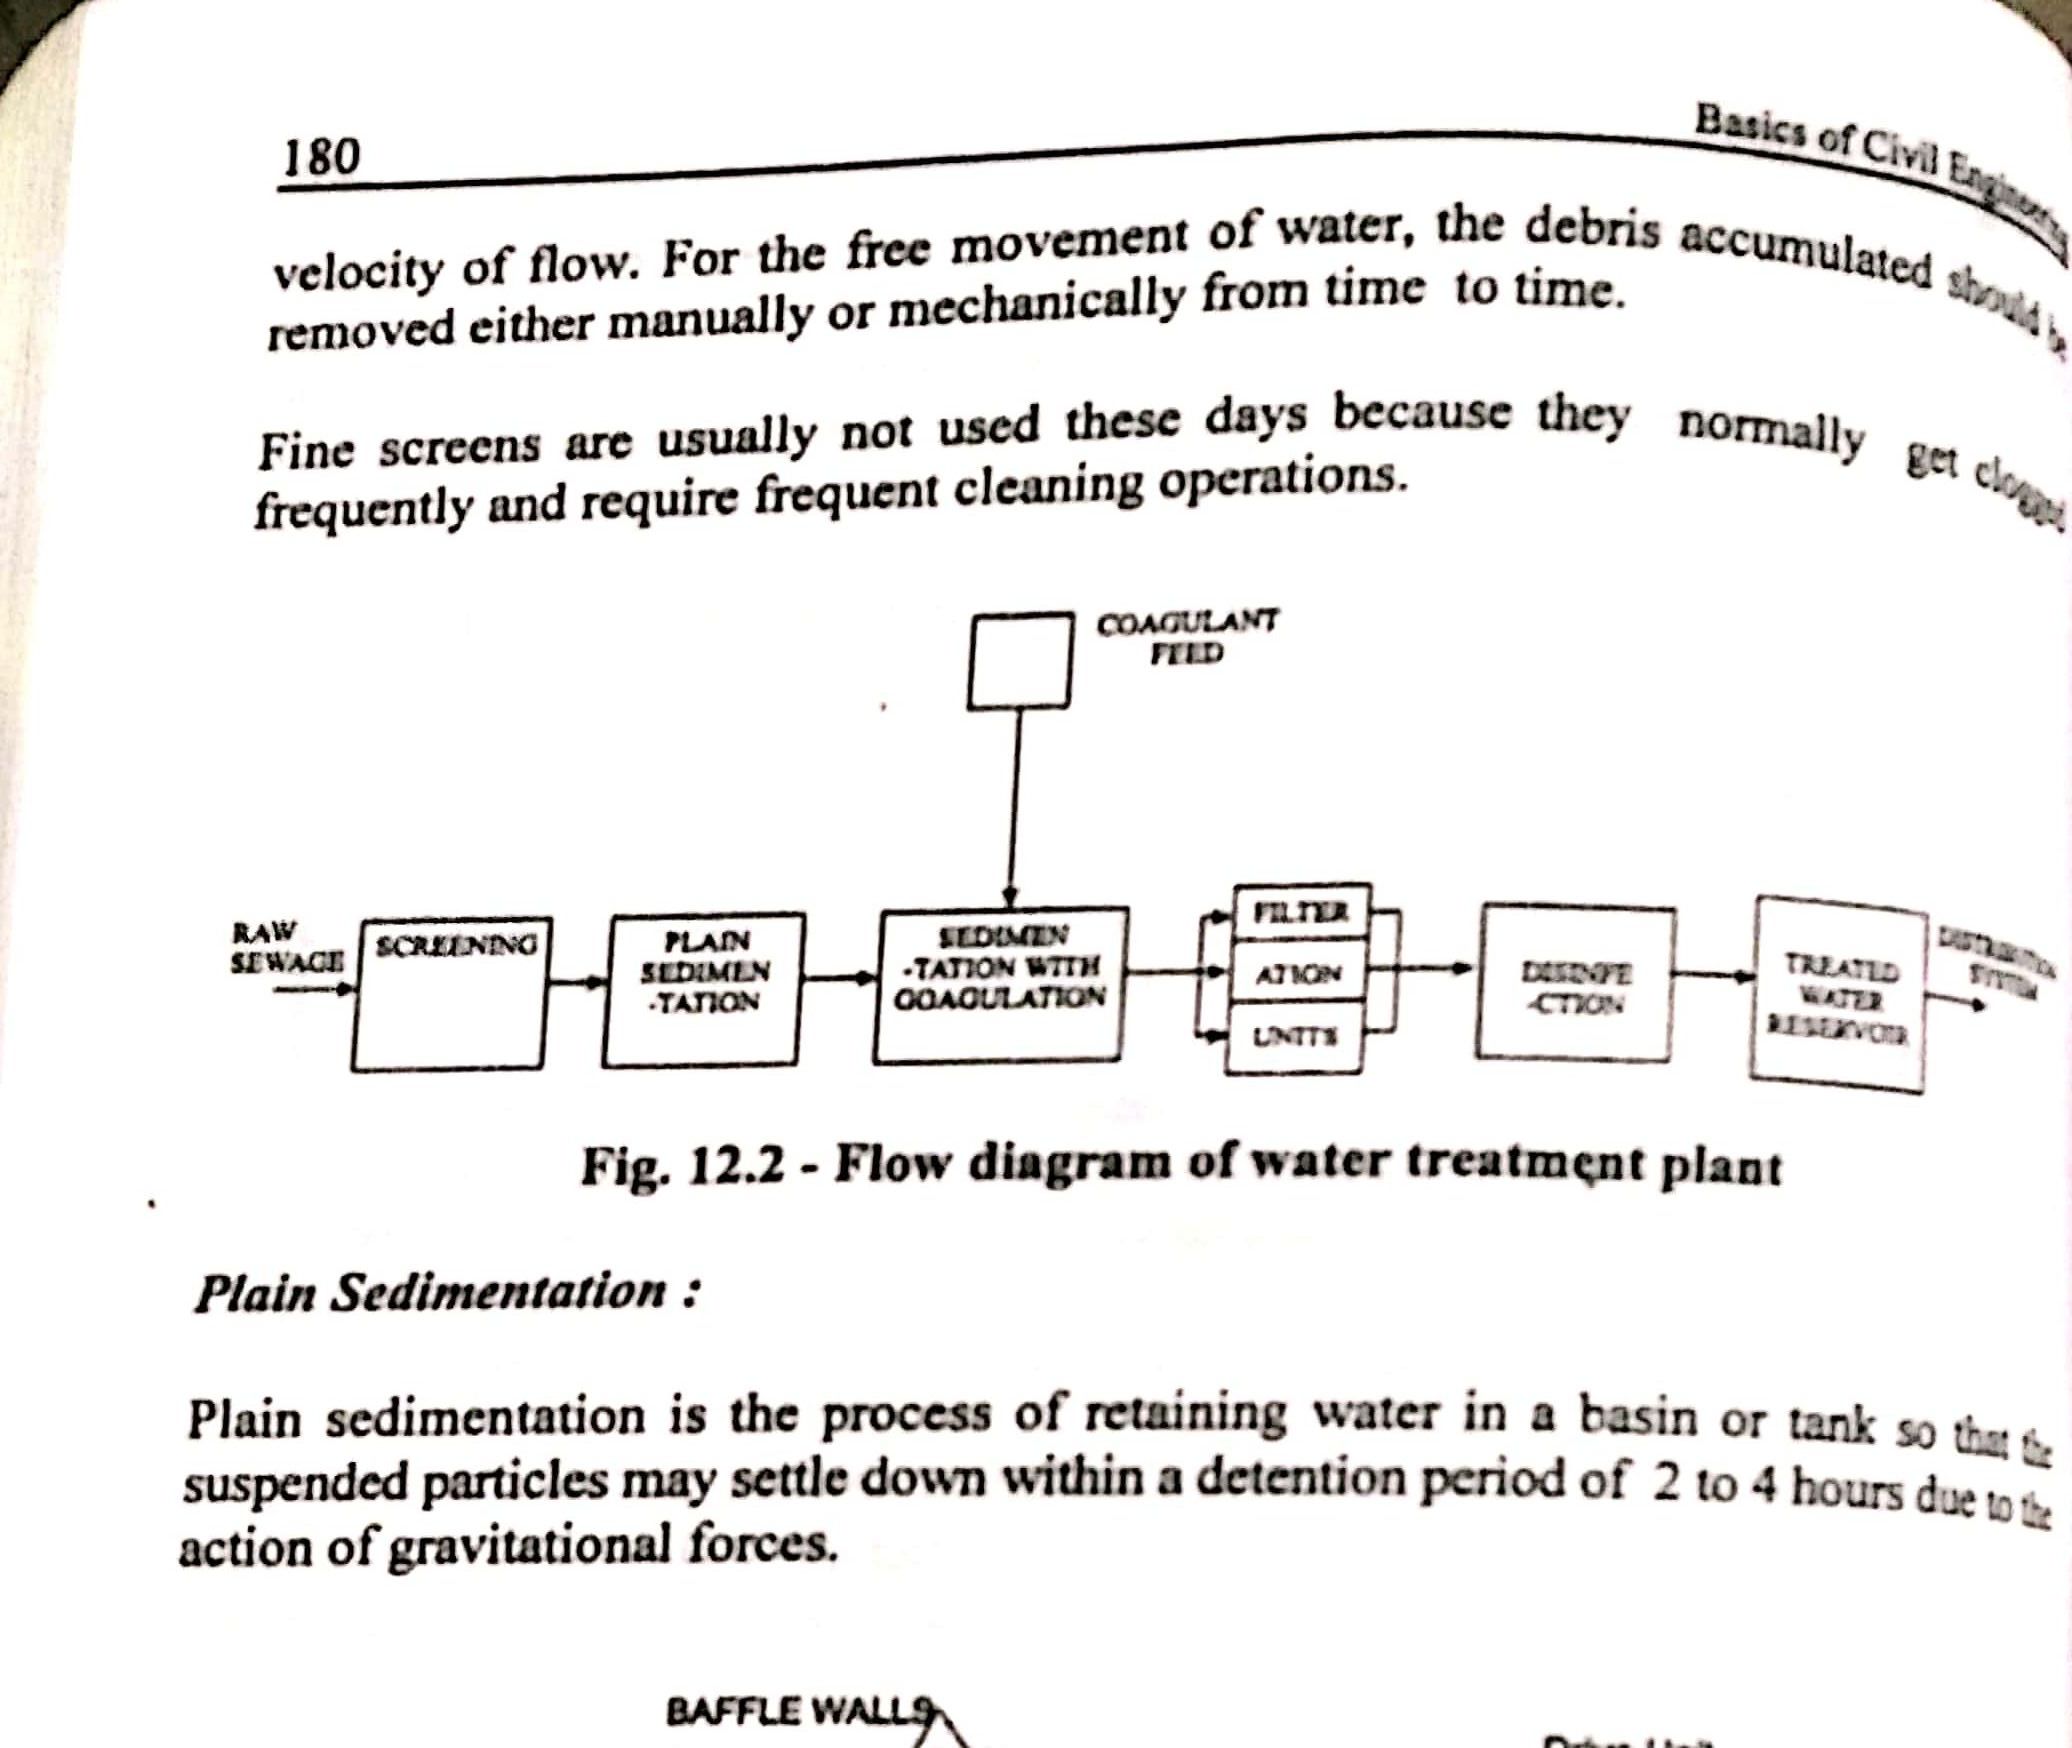 Flow diagram of water treatment plant -New Doc 2019-11-30 20.41.41_81.jpg